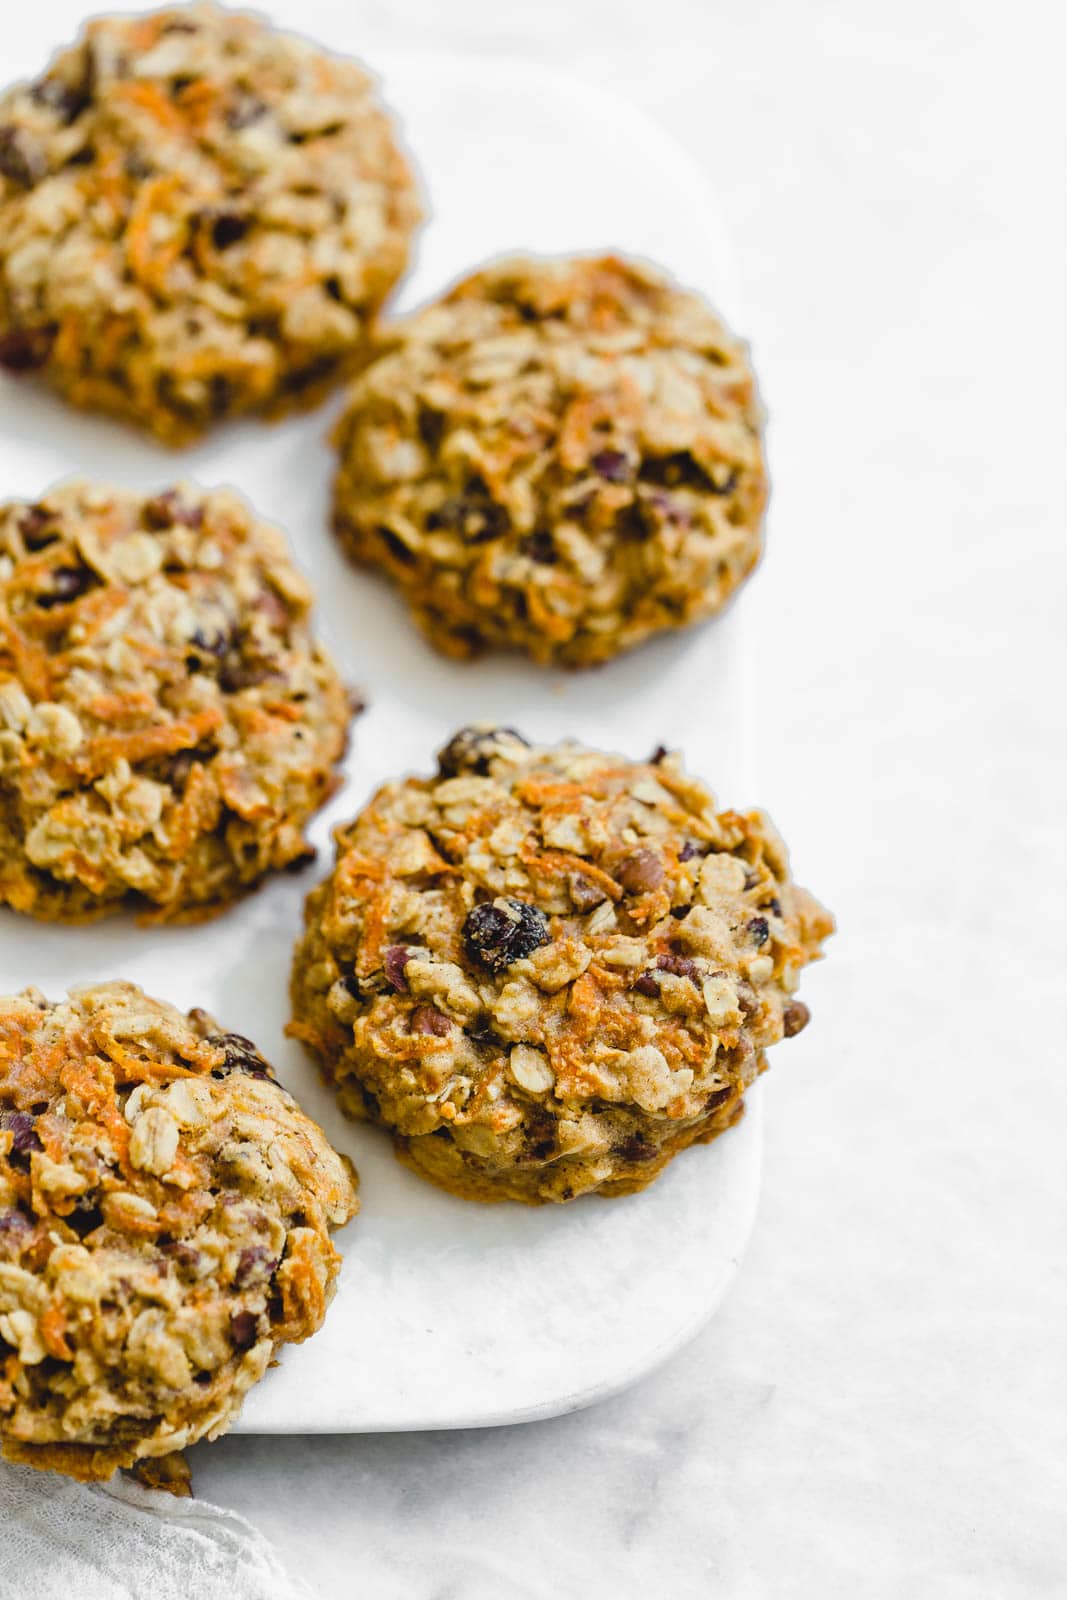 Healthy Carrot Cake Breakfast Cookies. Because you CAN eat cookies for breakfast!